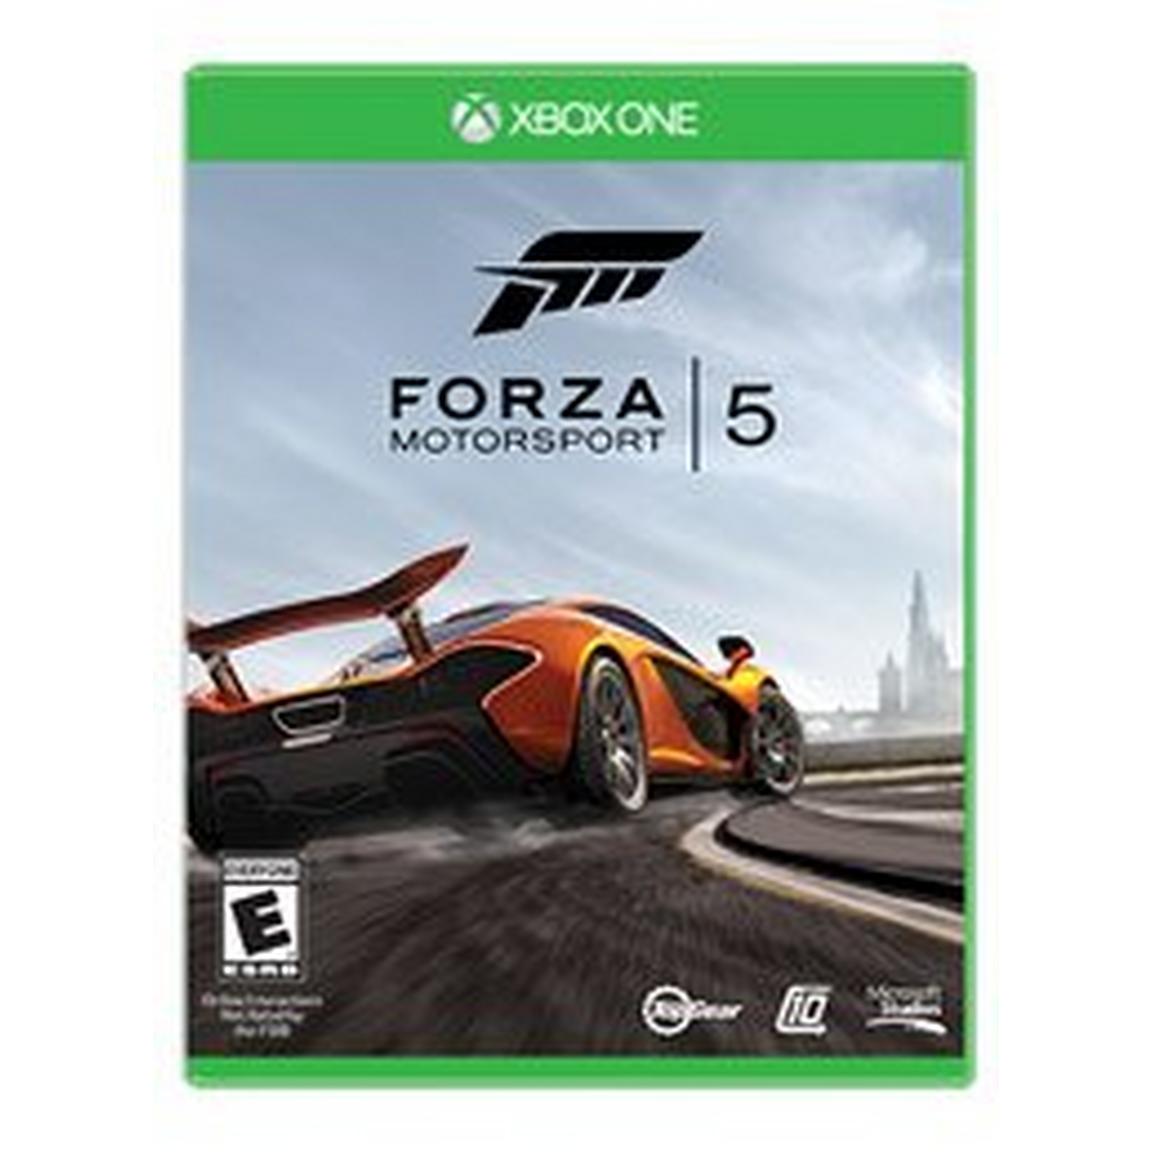 Forza Motorsport 5 - Xbox One, Pre-Owned -  Microsoft